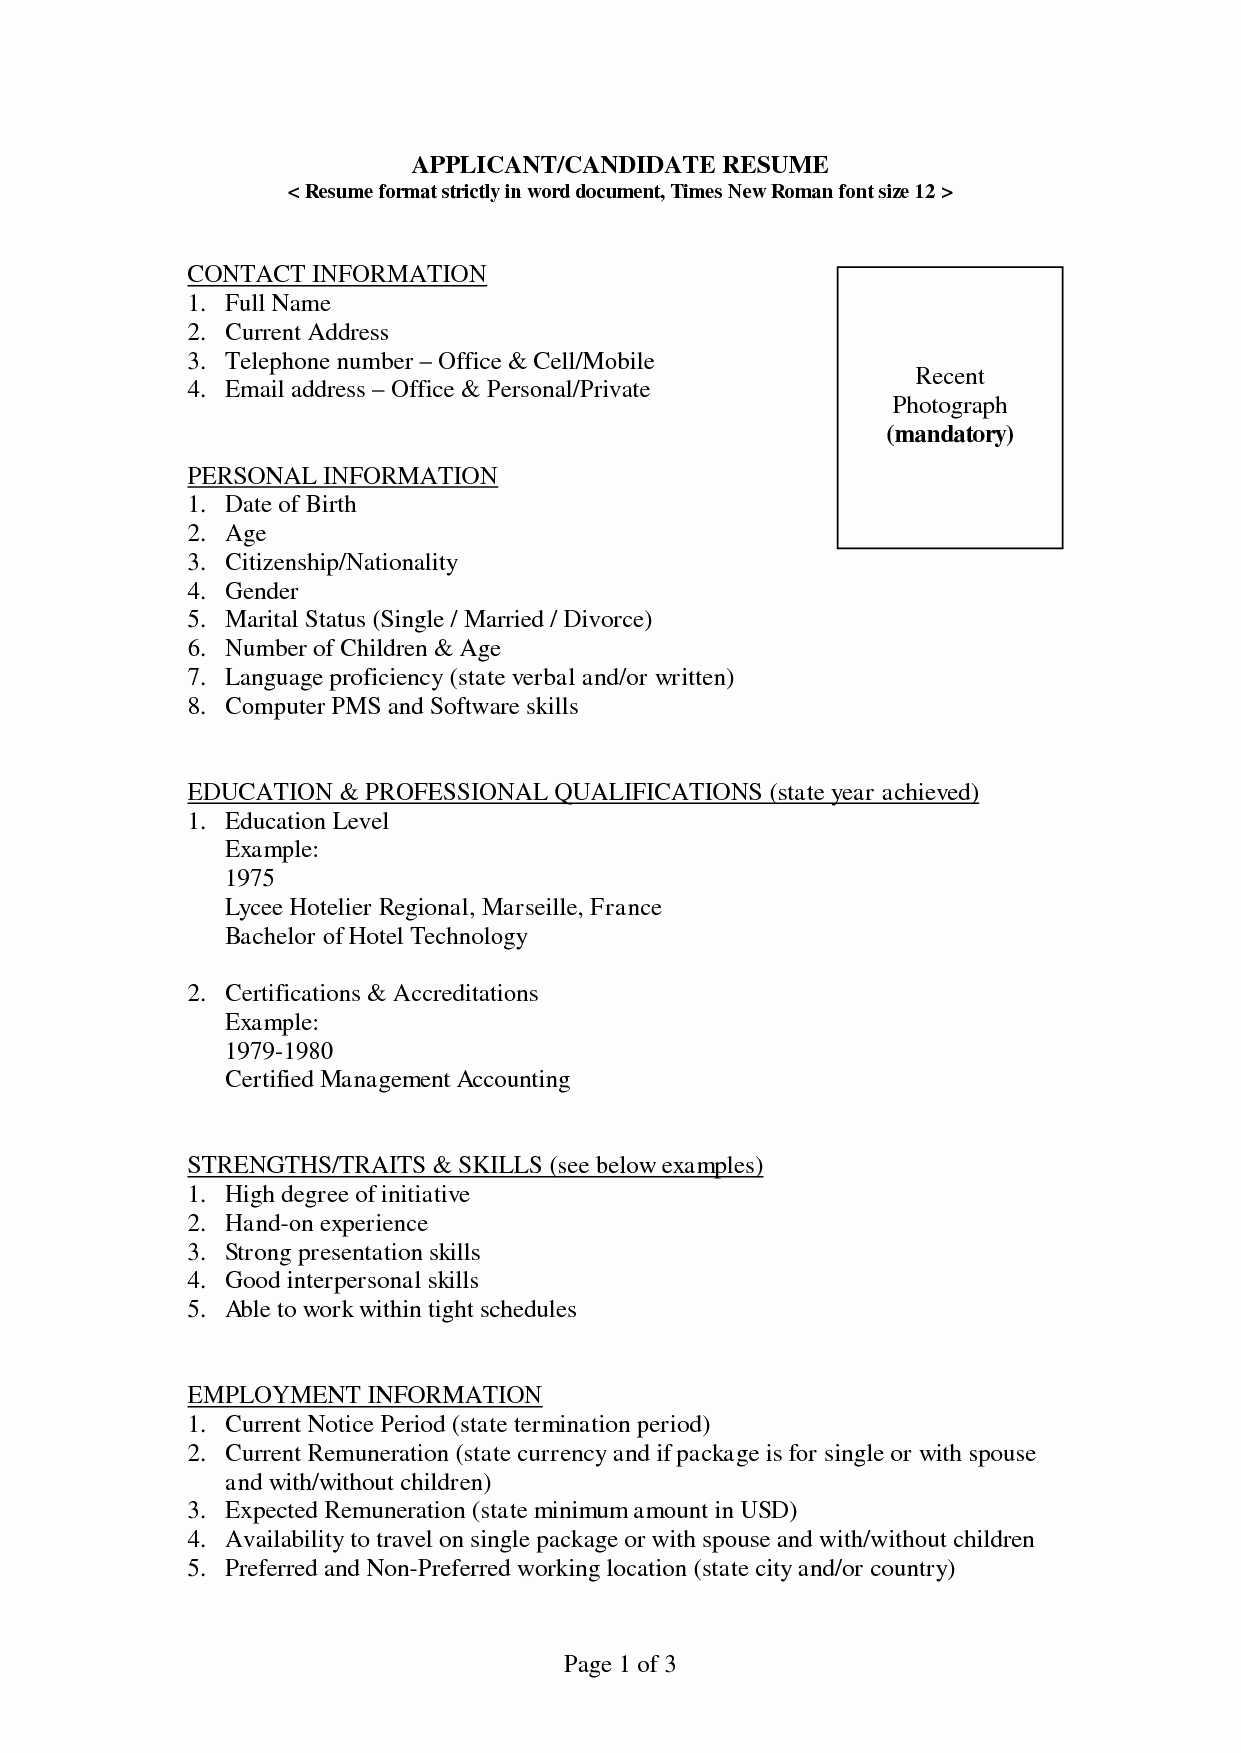 Business organizations Worksheet as Well as Word Download Free Inspirational Invoice Word Basic Free Business